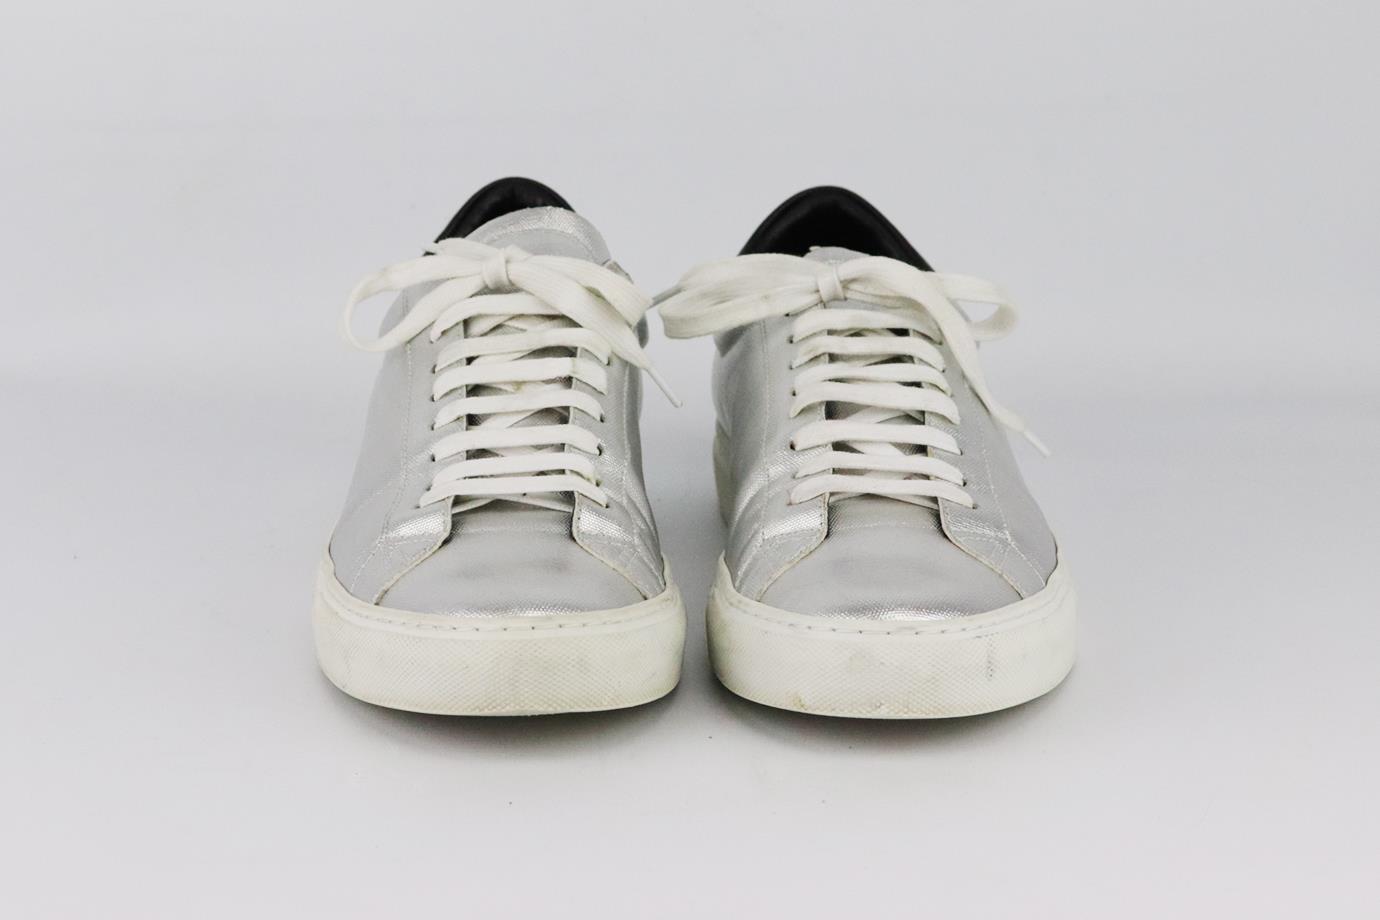 GIVENCHY MEN'S COATED CANVAS SNEAKERS EU 42 UK 8 US 9